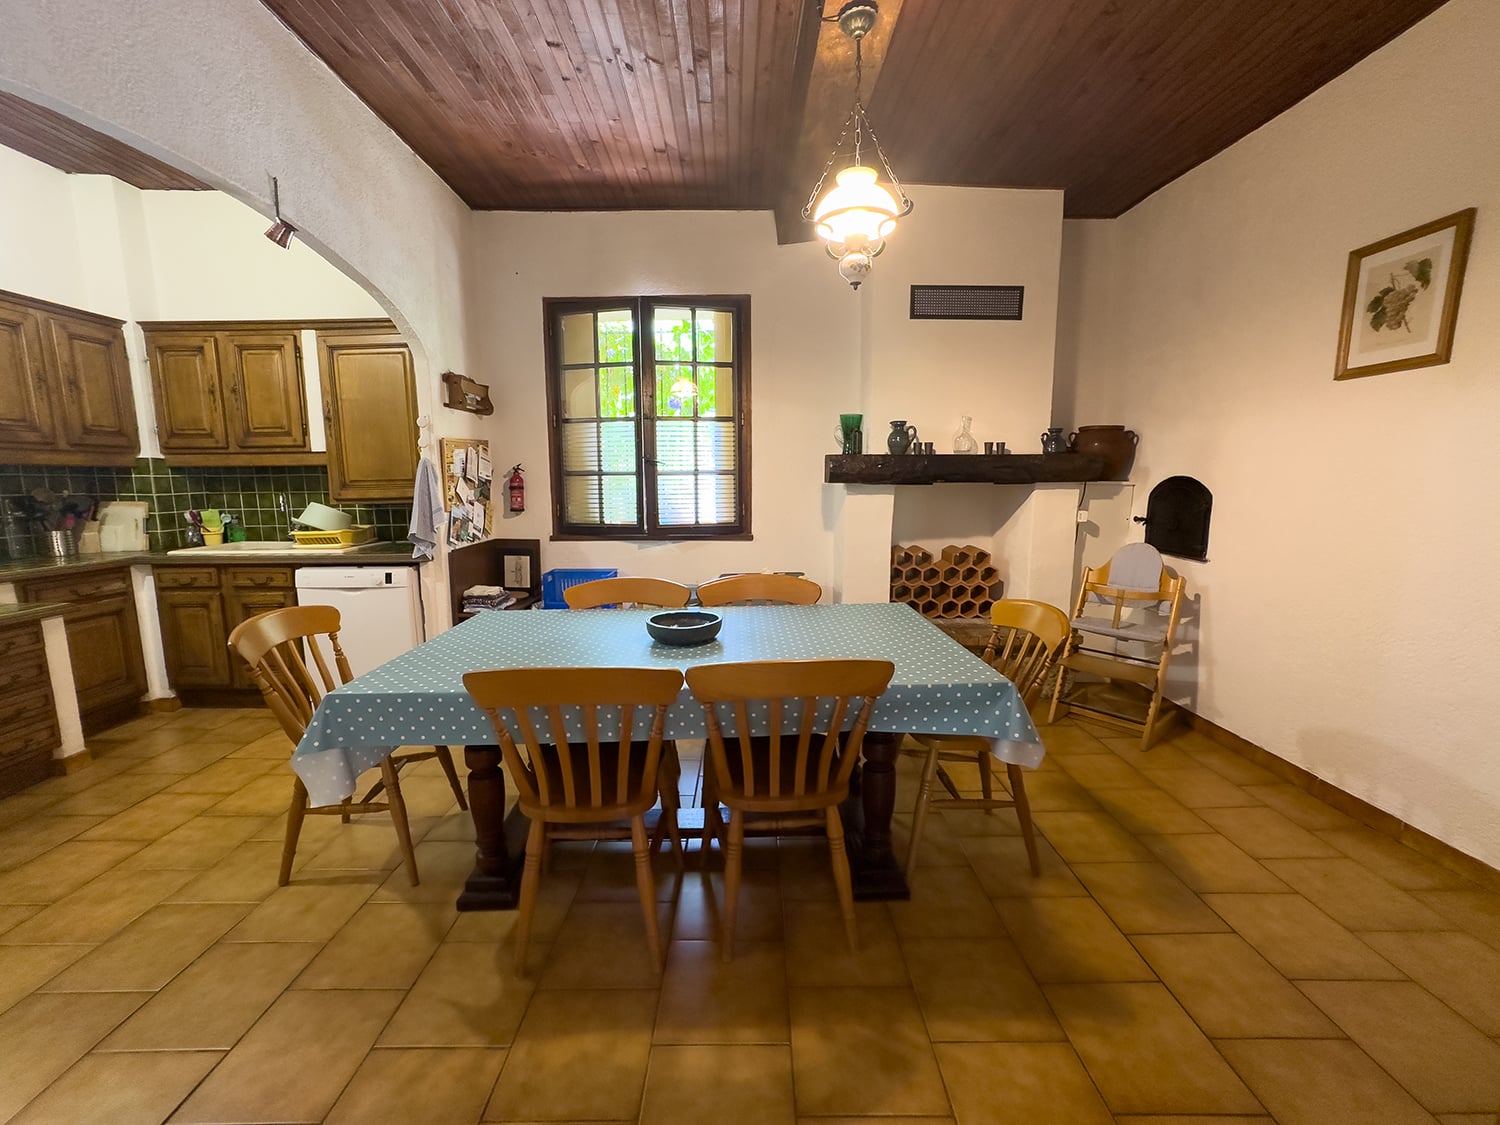 Kitchen | Holiday home in Aude